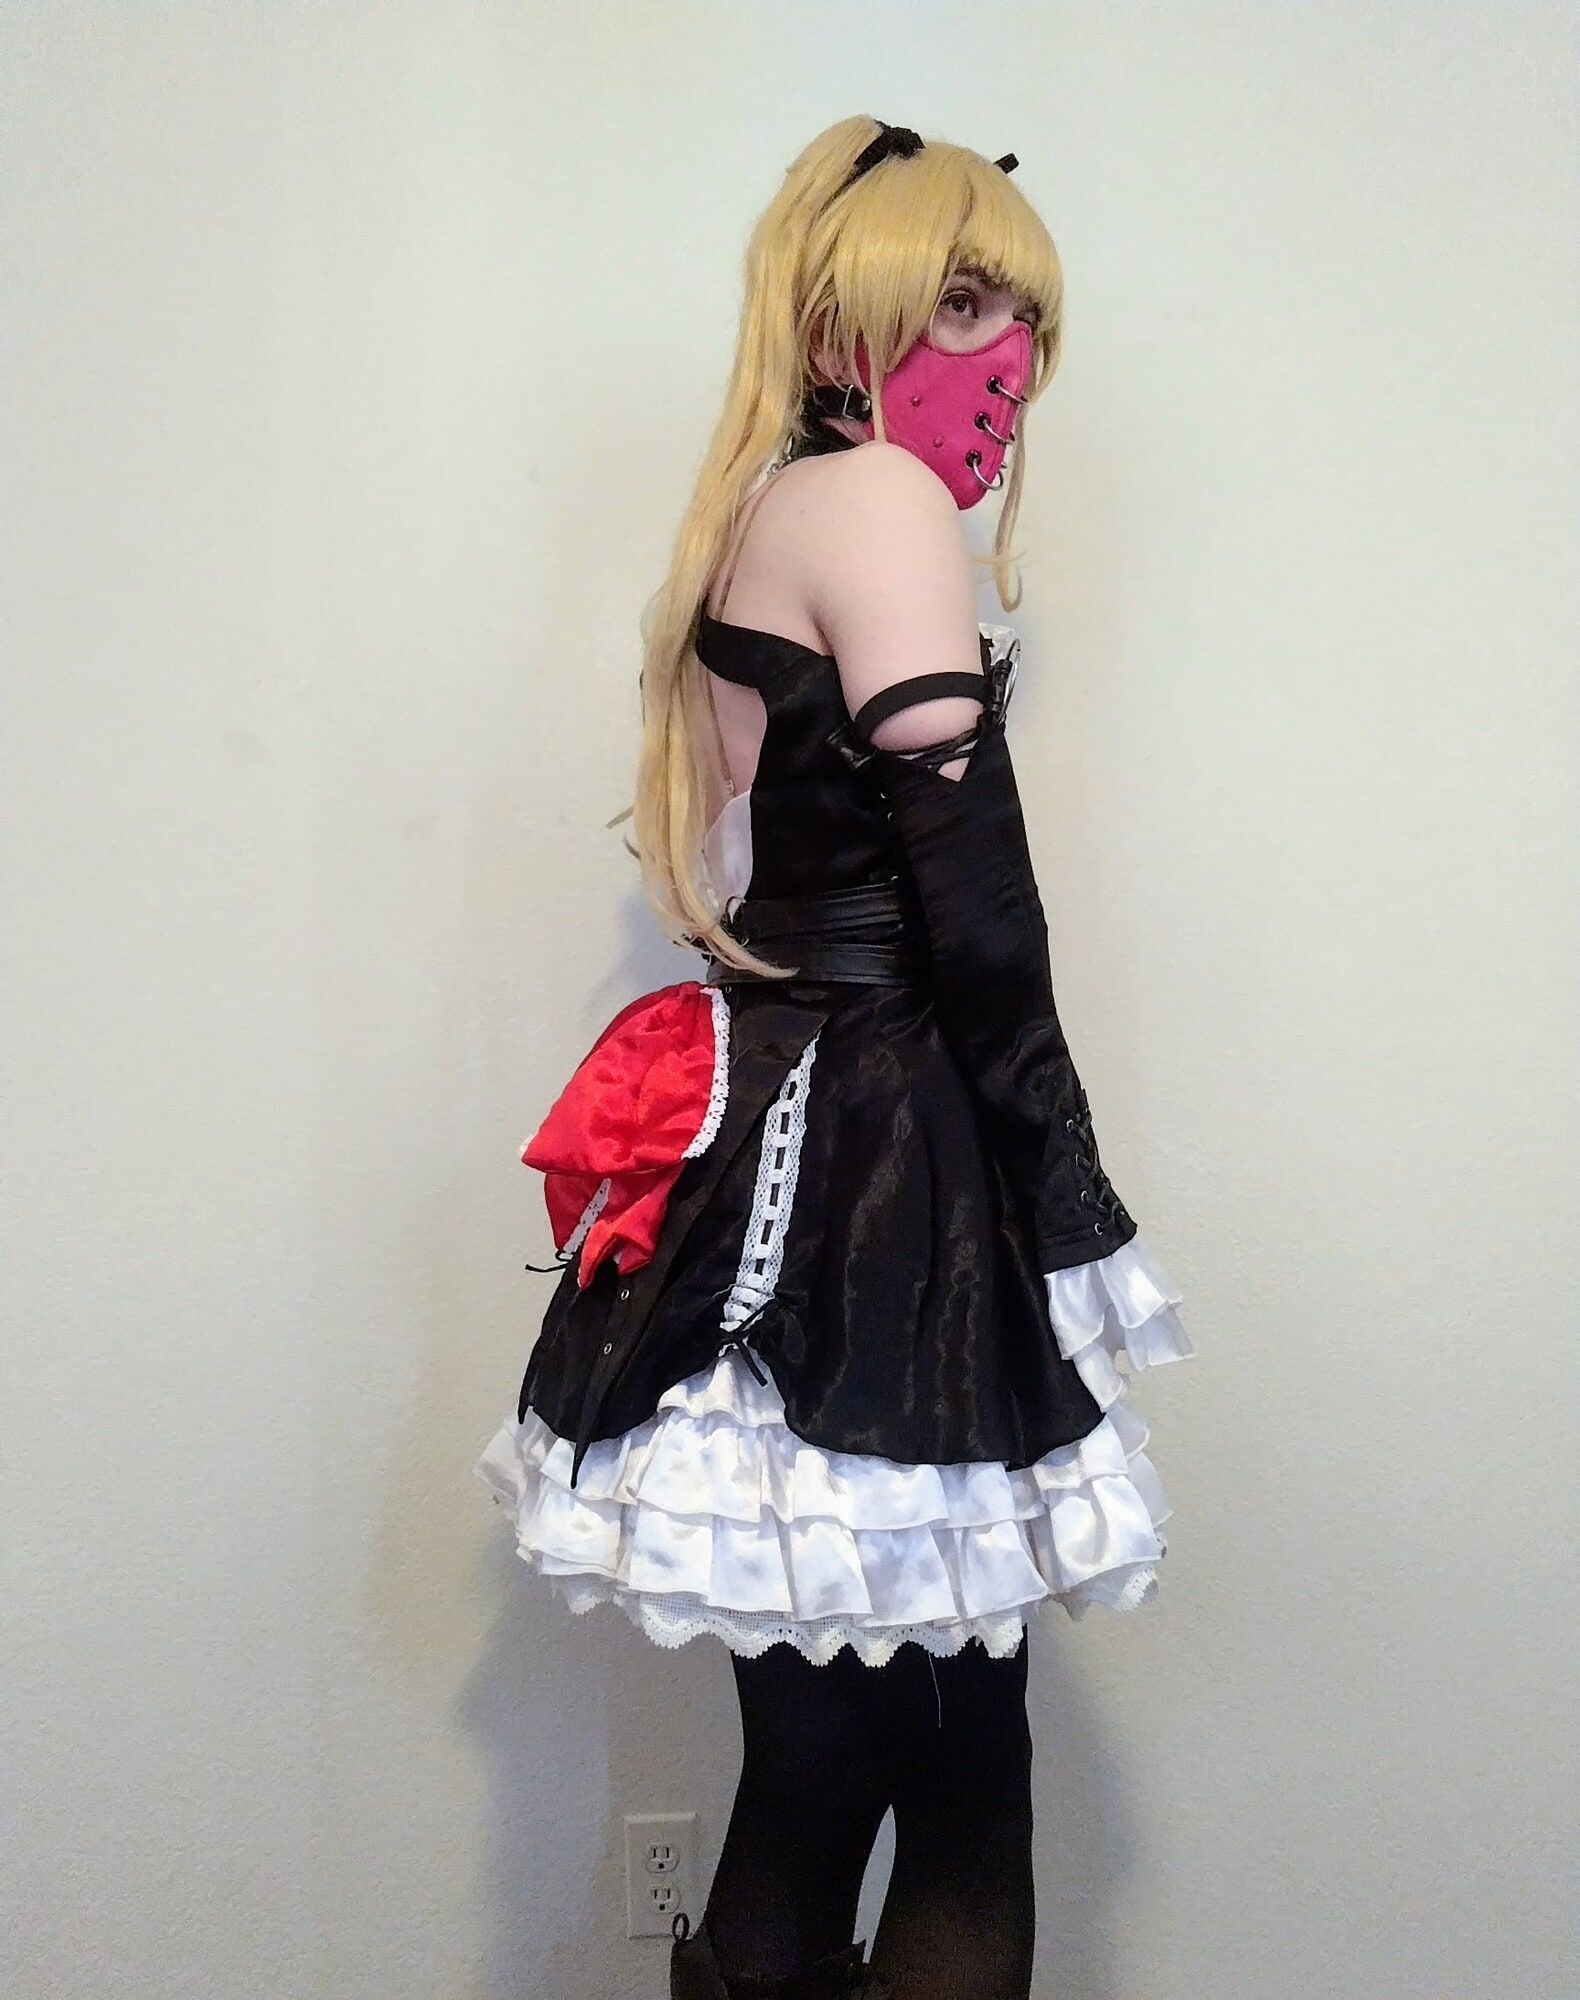 Cute Outfits & Cosplay 2 #37